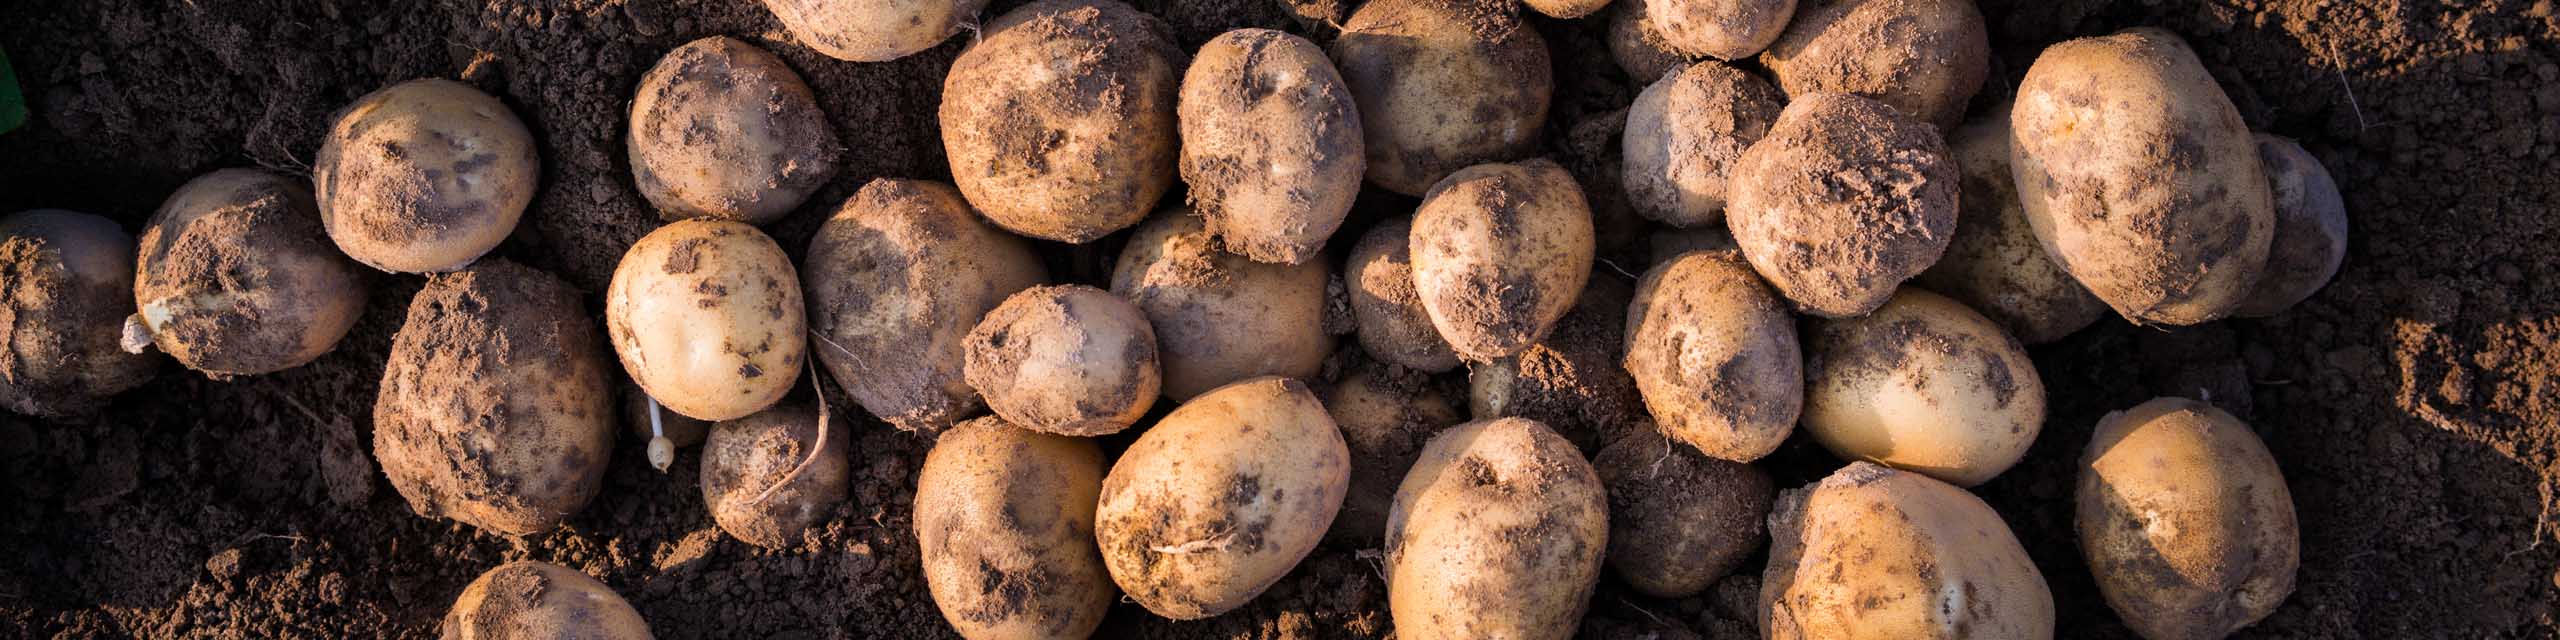 Top down view of a pile of freshly harvested potatoes resting in garden soil.